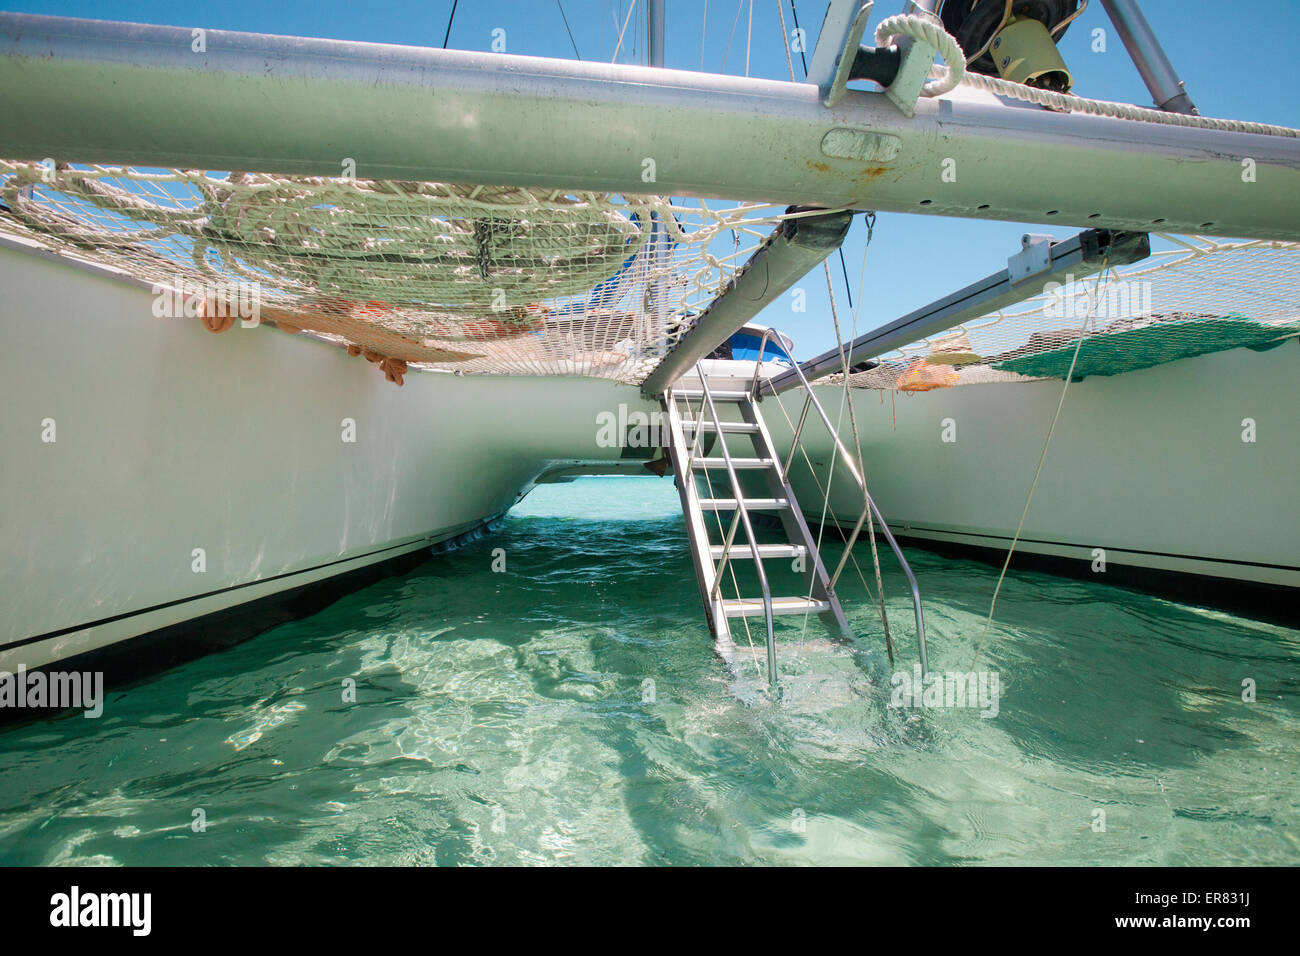 A drop-down aluminum staircase leads up to the deck of a catamaran boat. Stock Photo